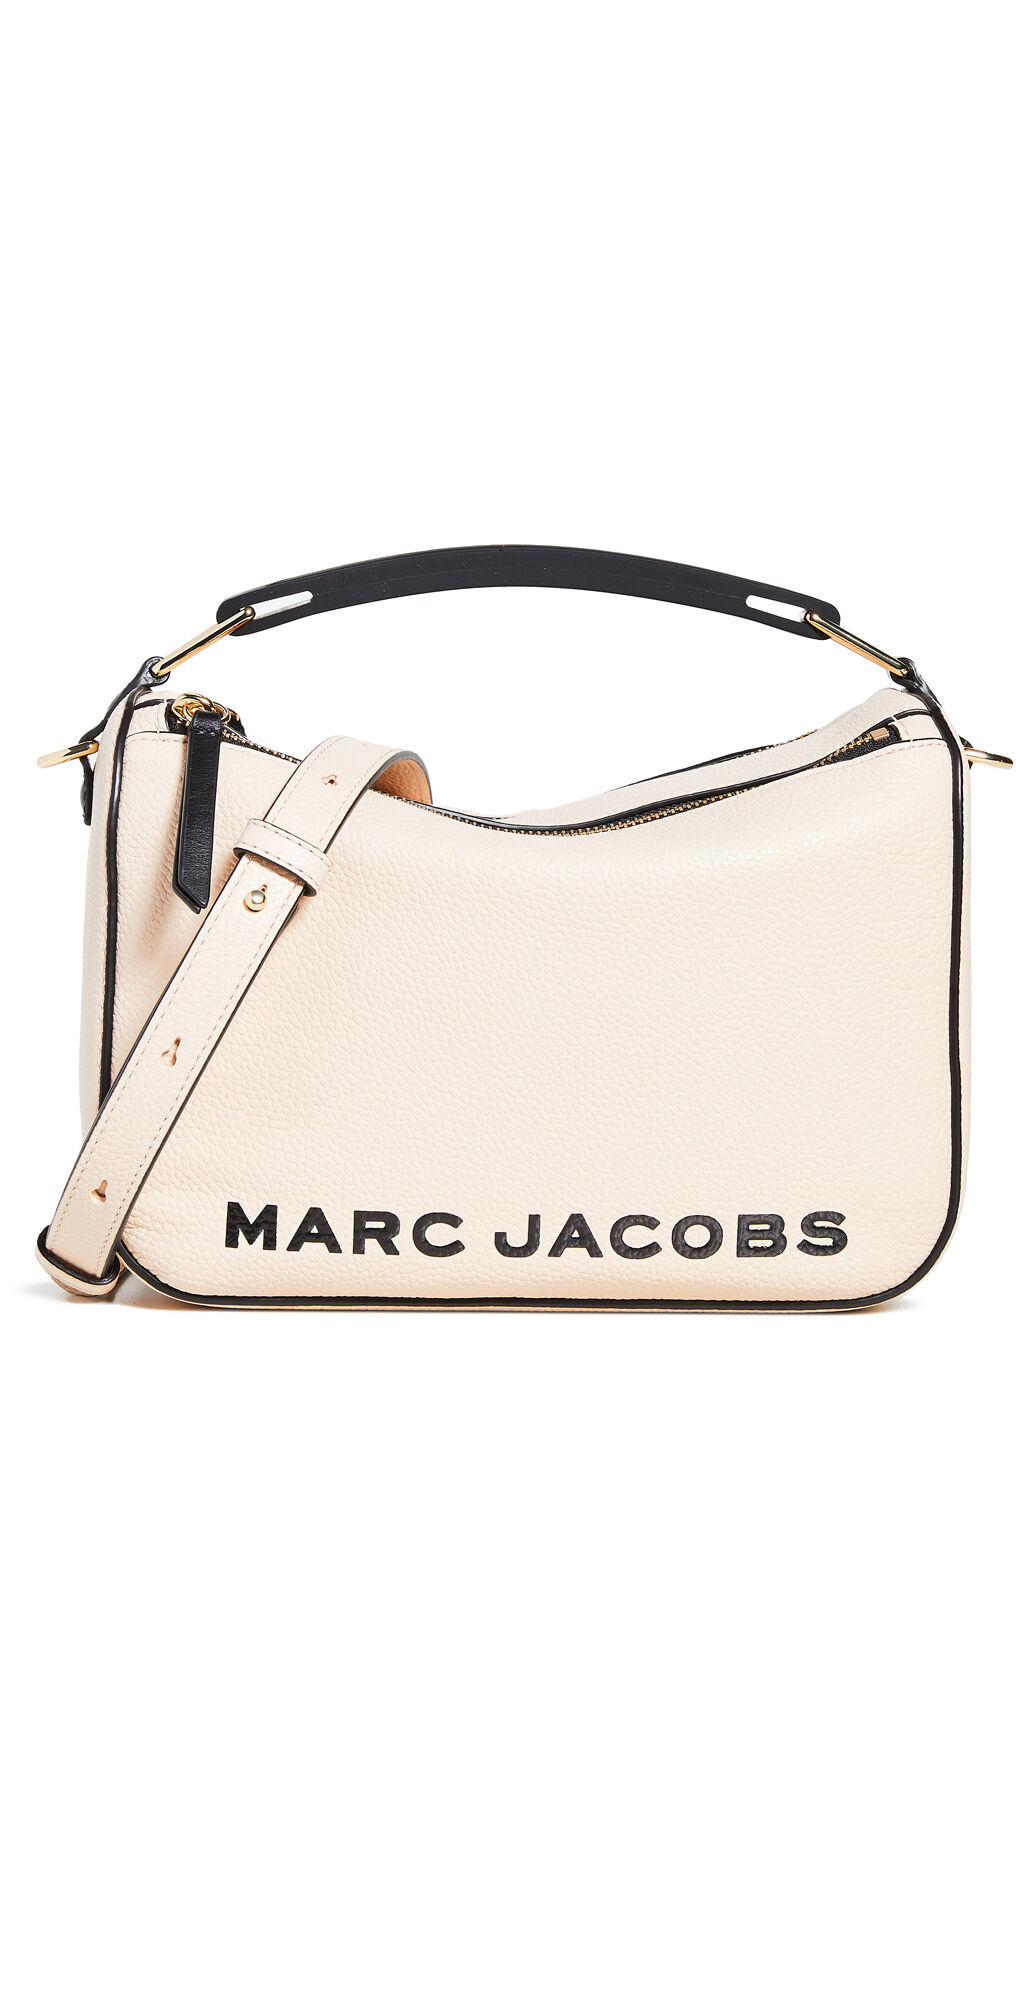 The Marc Jacobs The Soft Box 23 Bag Apricot Beige One Size  Apricot Beige  size:One Size